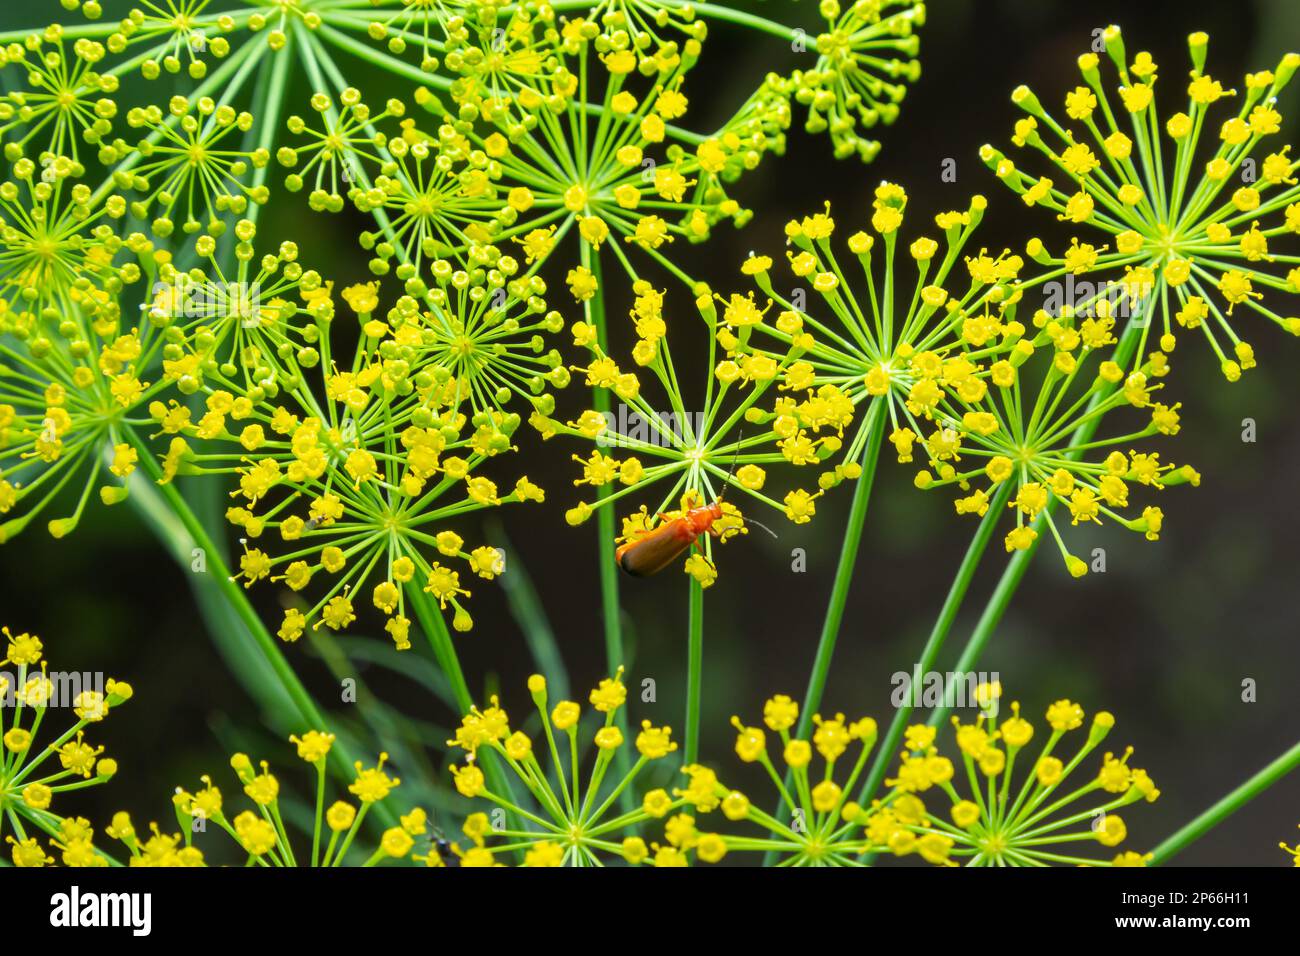 Dill umbrella with seeds in sunlight, close up. Yellow Fennel flowers on green blurred background. Natural plant pattern. Stock Photo